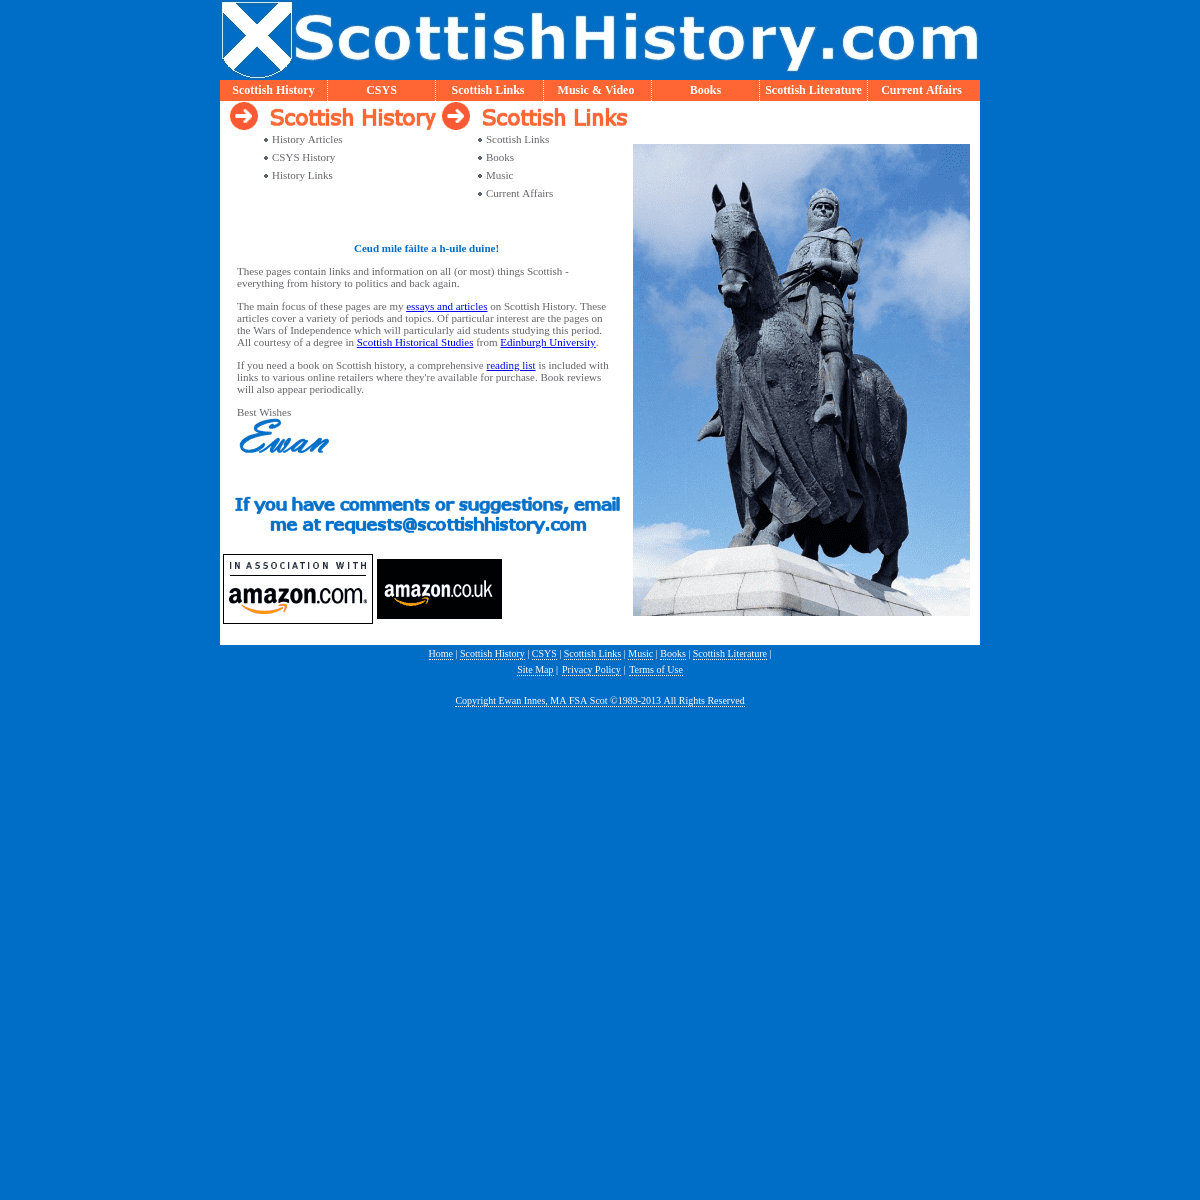 A complete backup of scottishhistory.com